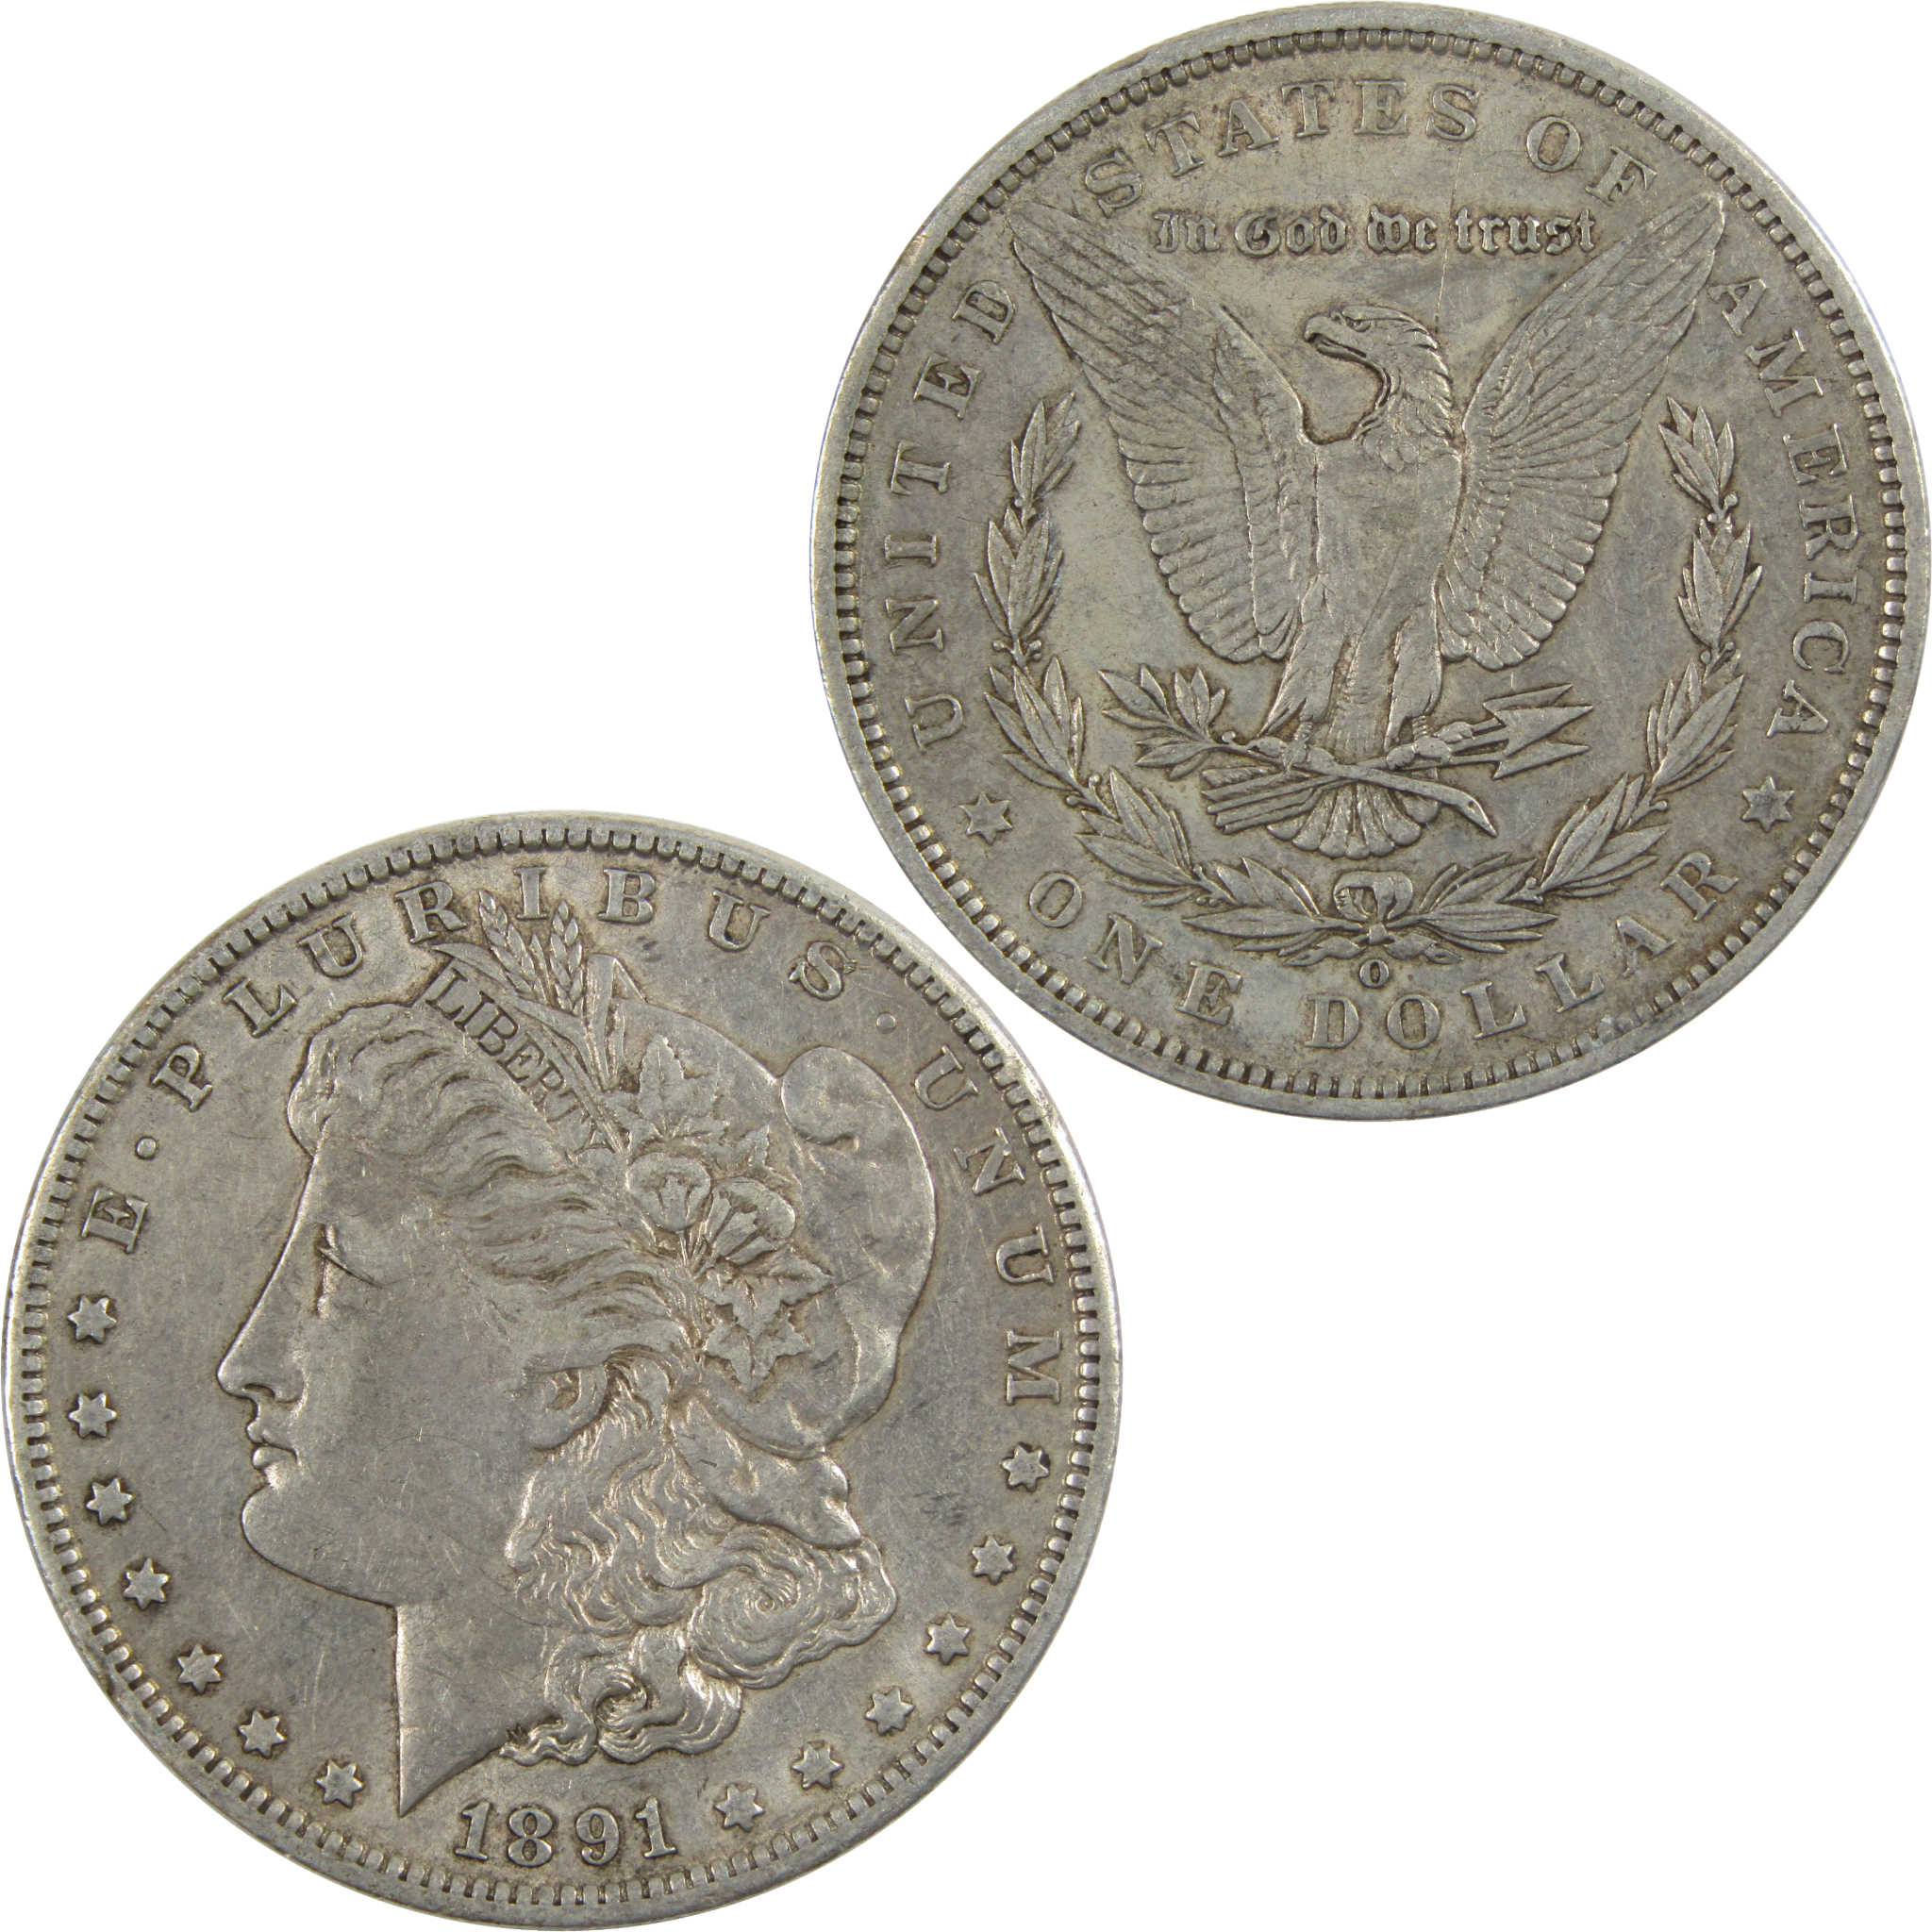 1891 O Morgan Dollar XF EF Extremely Fine 90% Silver $1 Coin SKU:I6055 - Morgan coin - Morgan silver dollar - Morgan silver dollar for sale - Profile Coins &amp; Collectibles